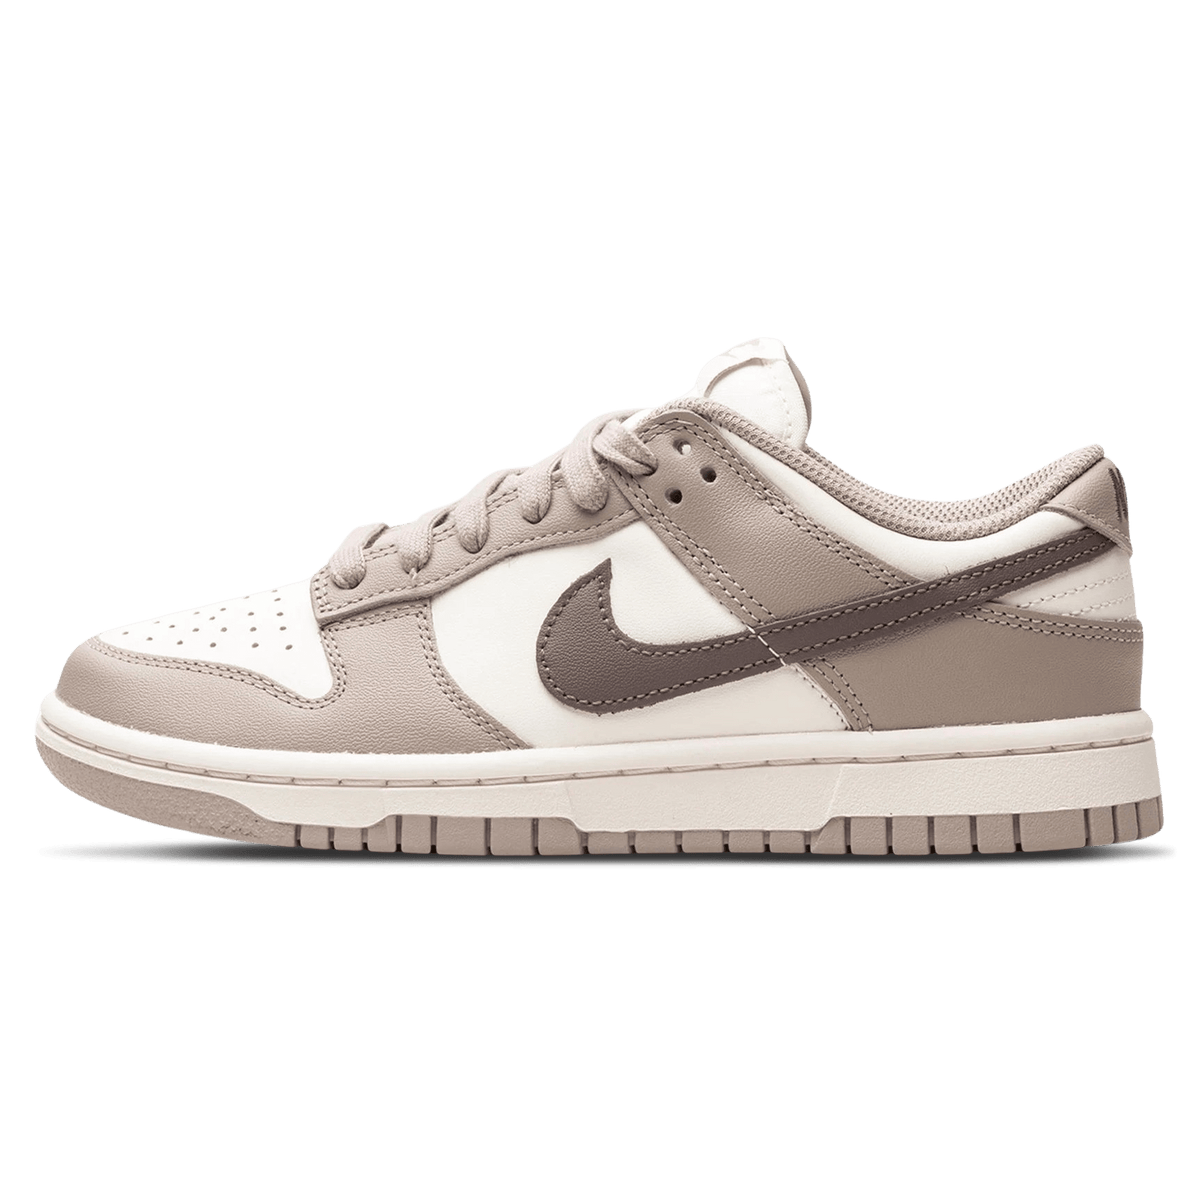 Nike Dunk Low Wmns 'Diffused Taupe' - Kick Game